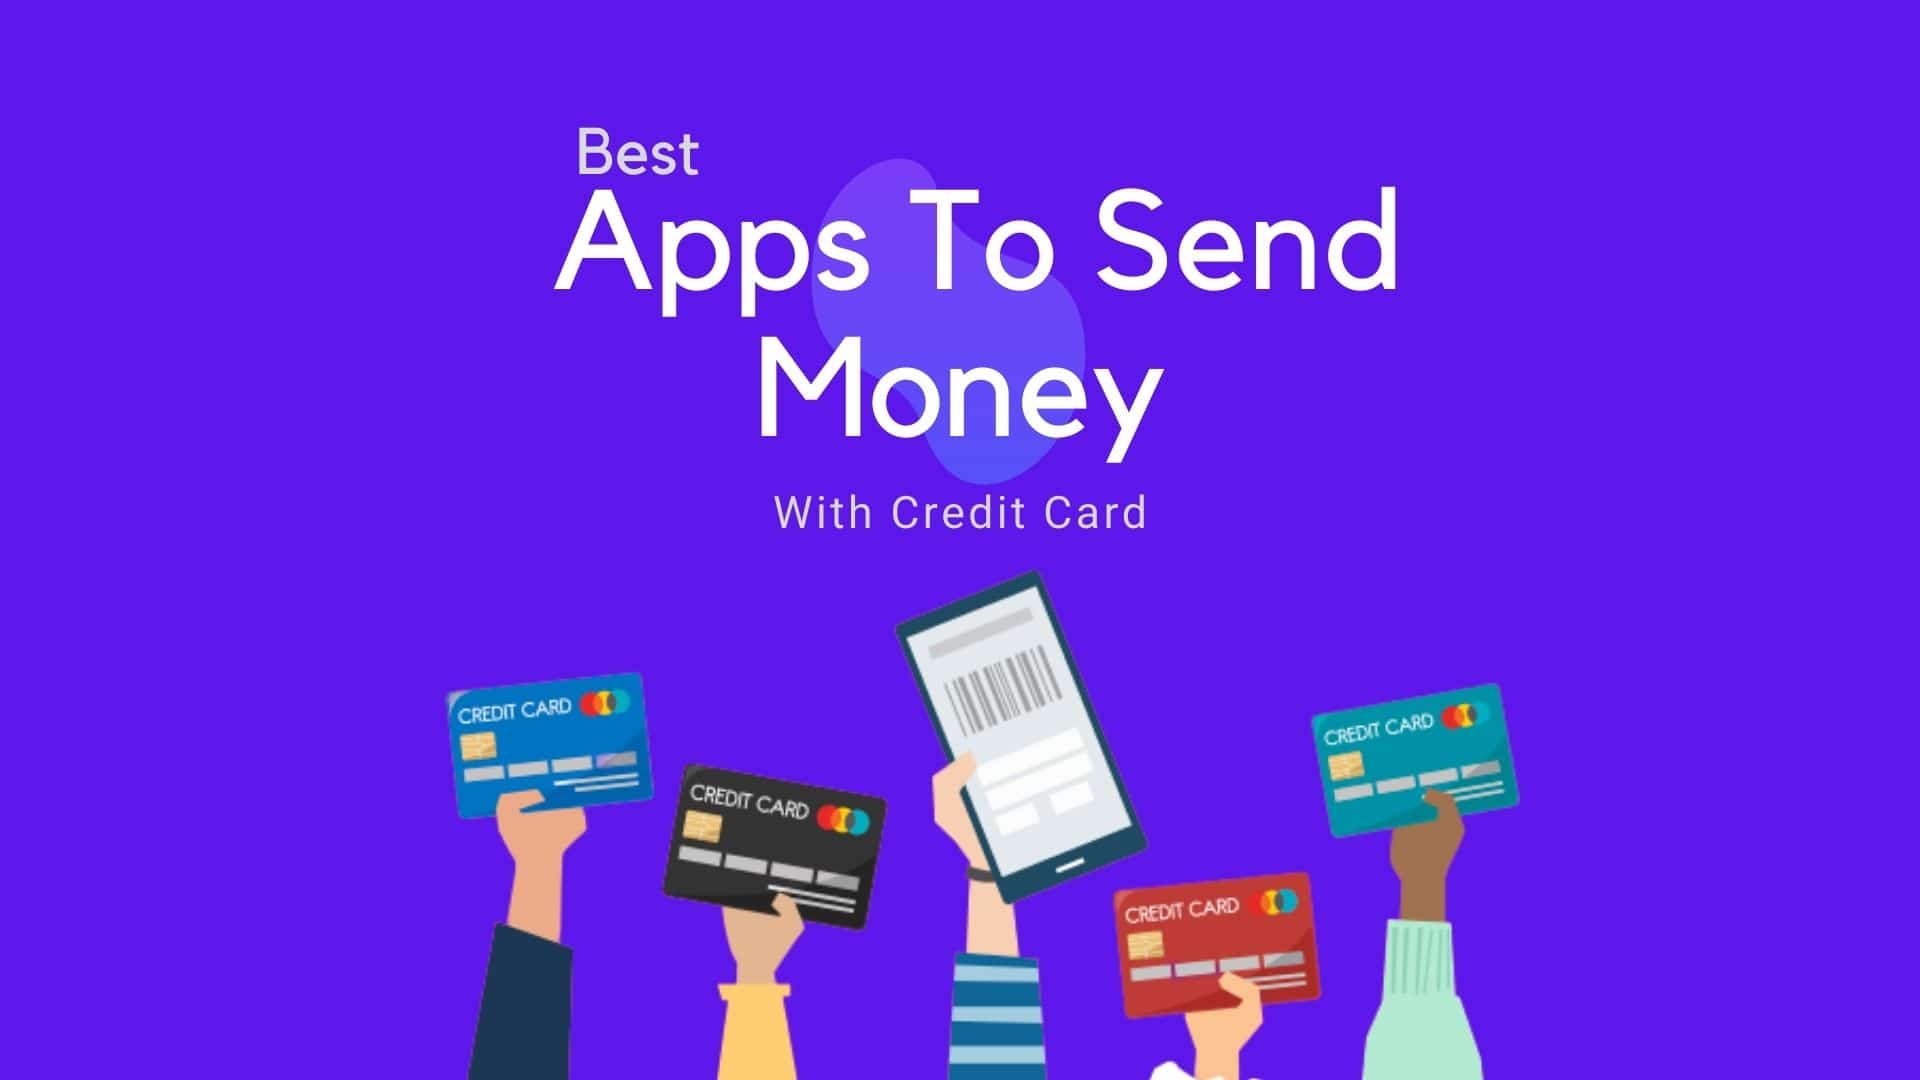 5 Best Apps To Send Money with Credit Card